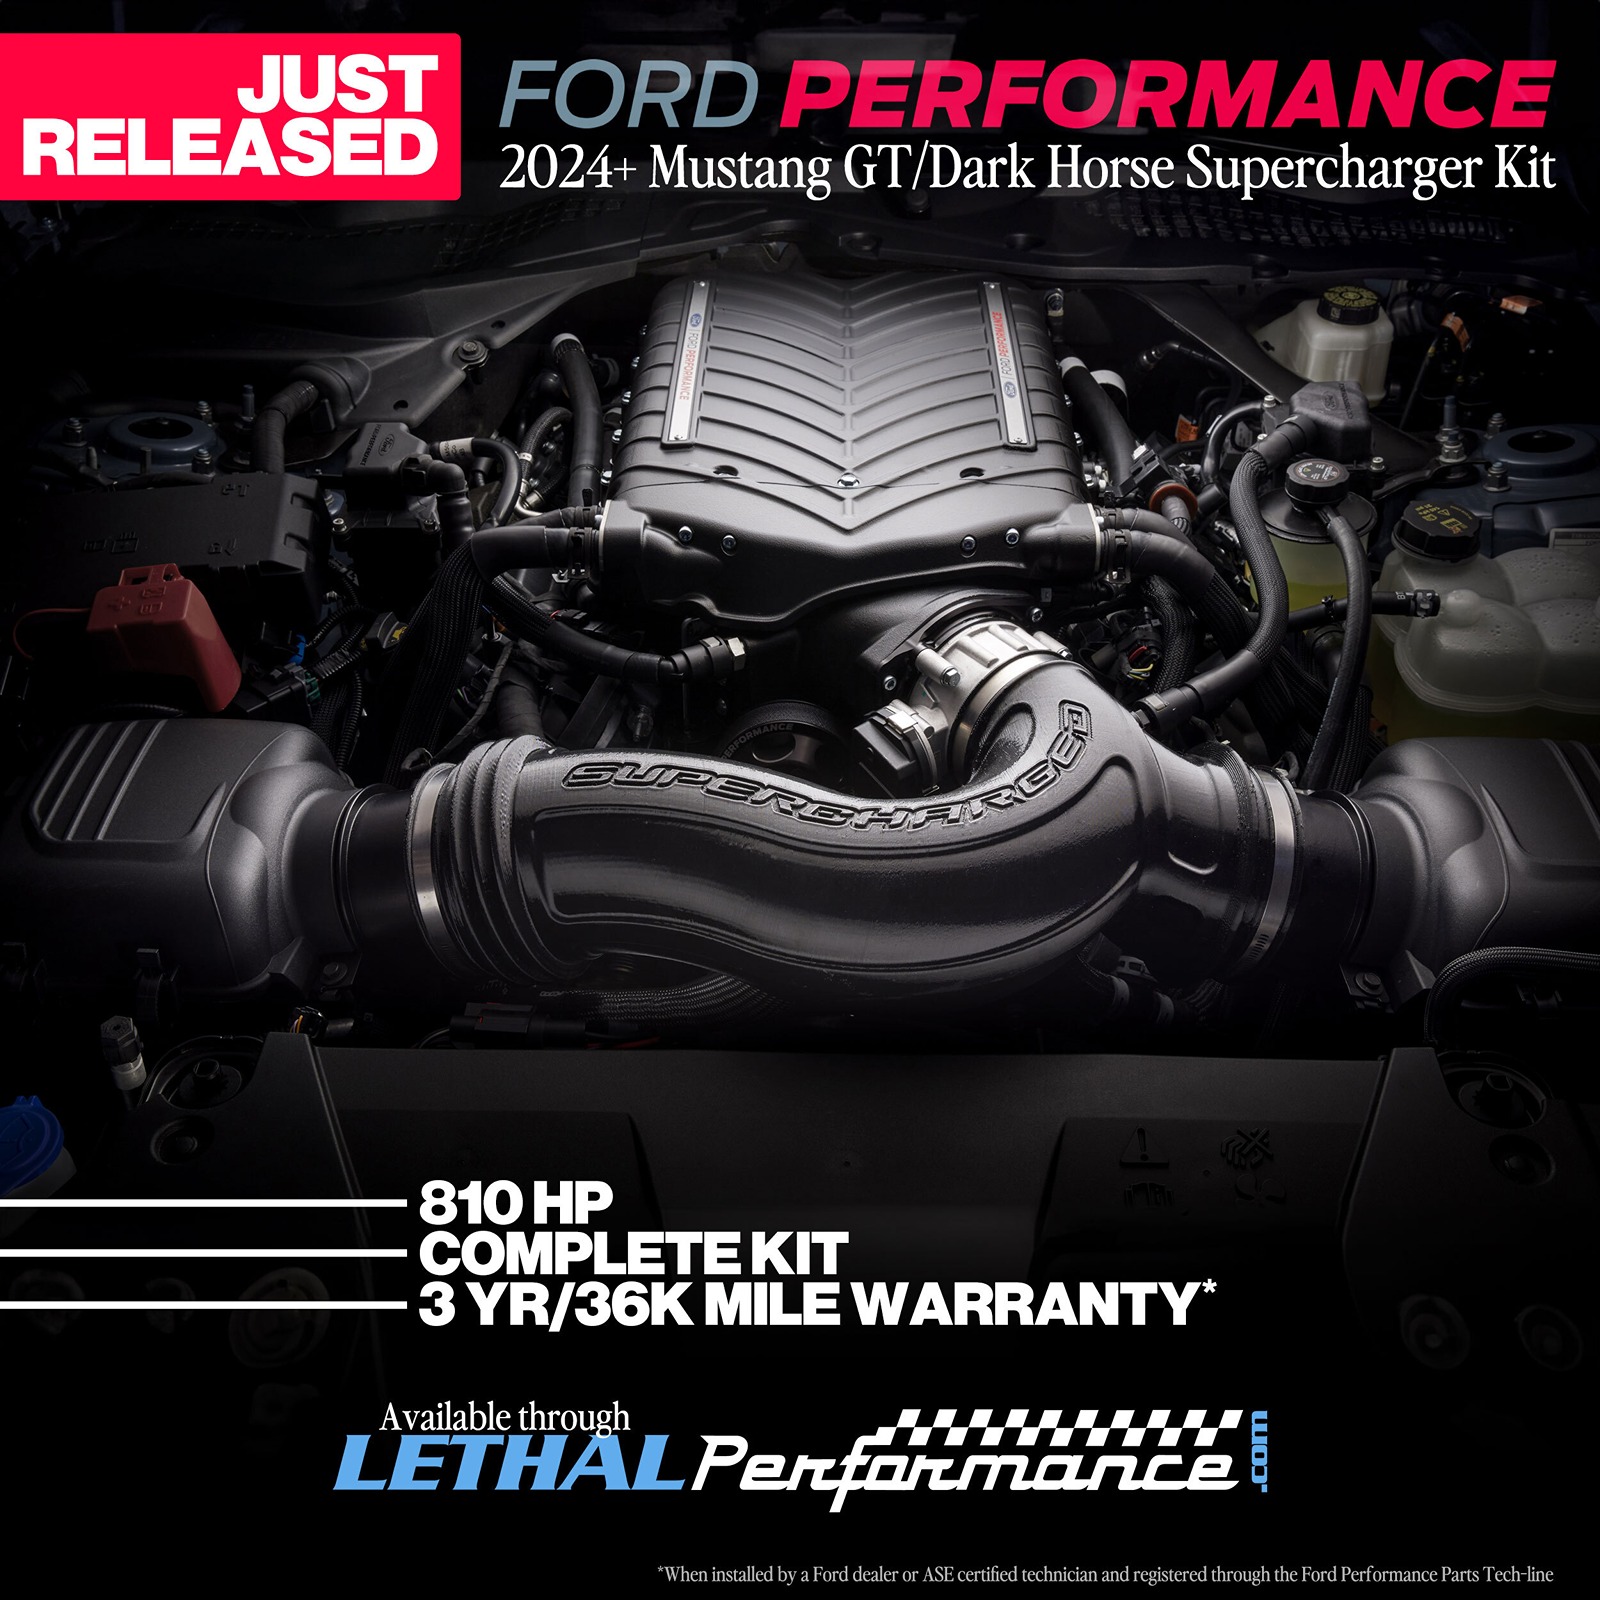 S650 Mustang Ford Performance Supercharger kit for 2024 5.0L Mustang GT and Dark Horse!!! M-6066-M8800_V1